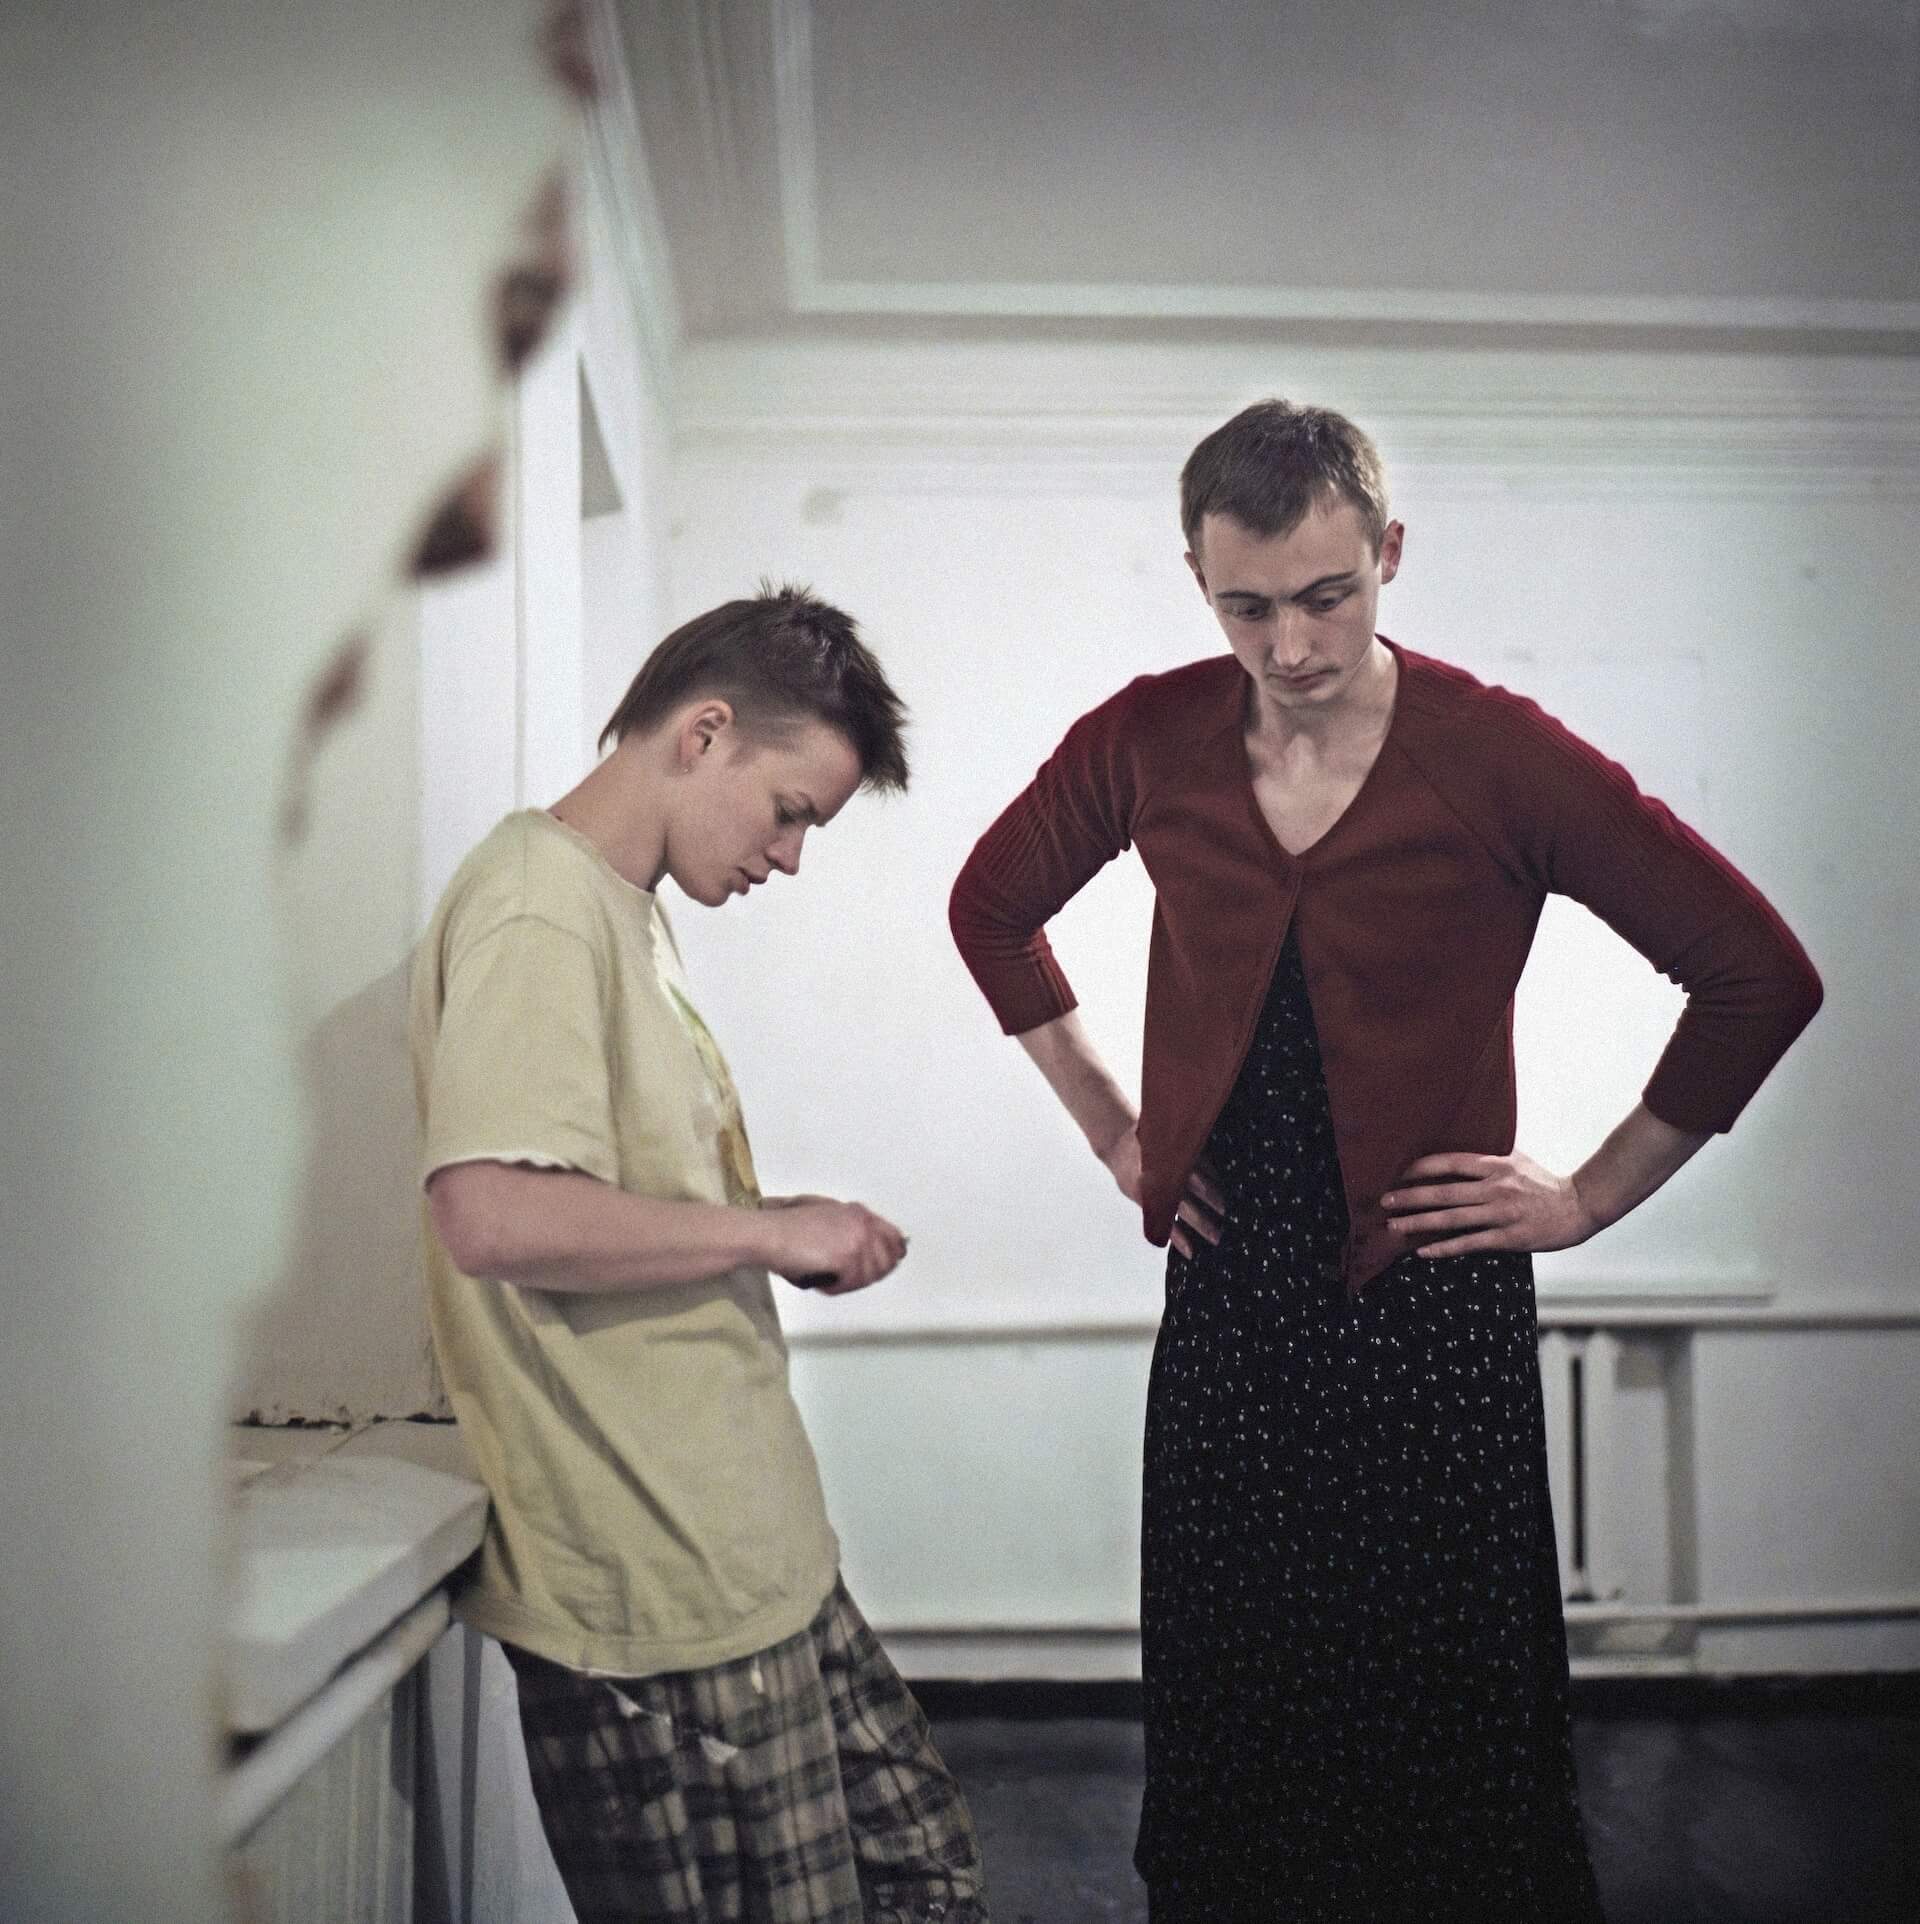 Two people are standing. One in the right is wearing a red cardigan and a polka dot skirt with their arms on the waist. The one on the left is leaning against the wall, looking down.